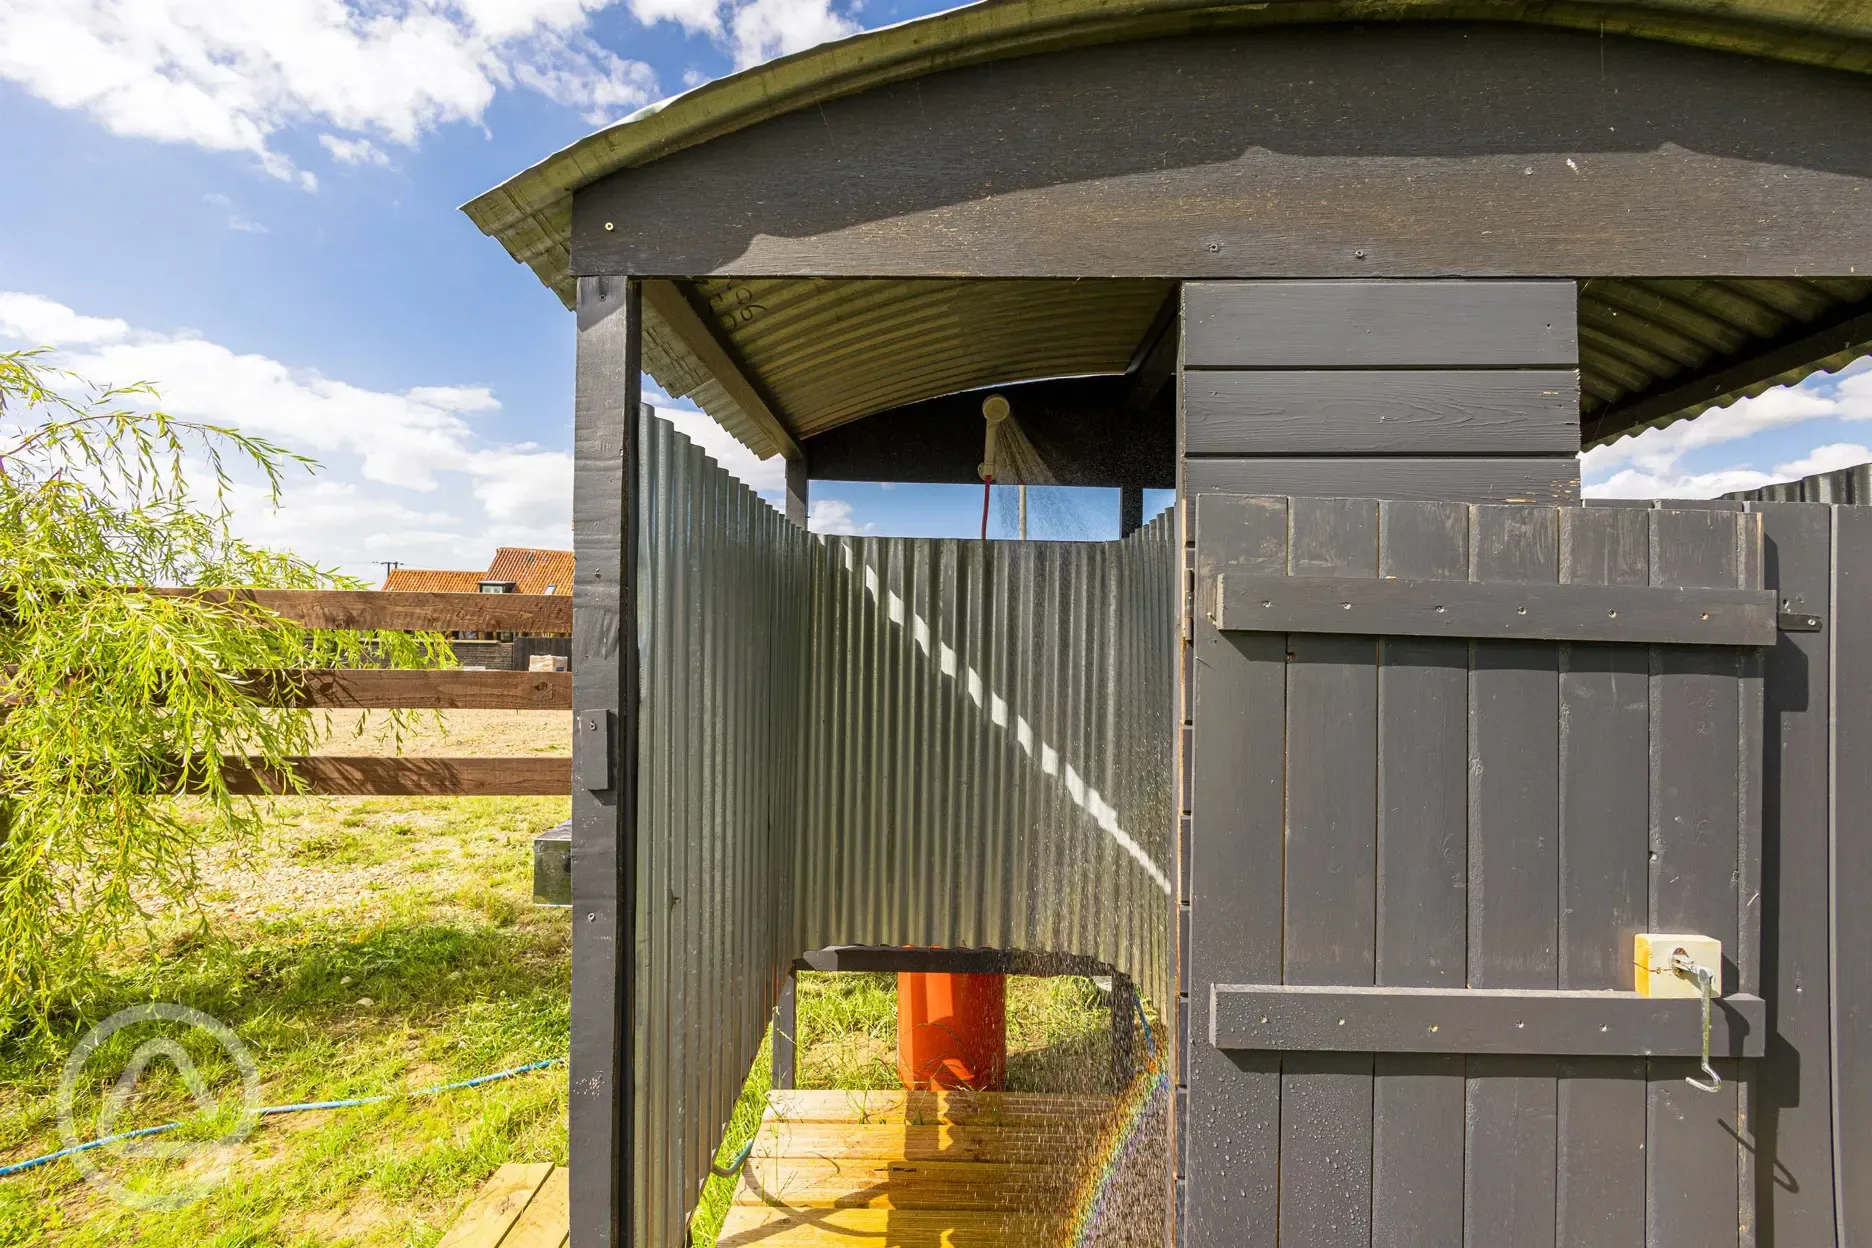 Our free outdoor shower are perfect for hot sunny days